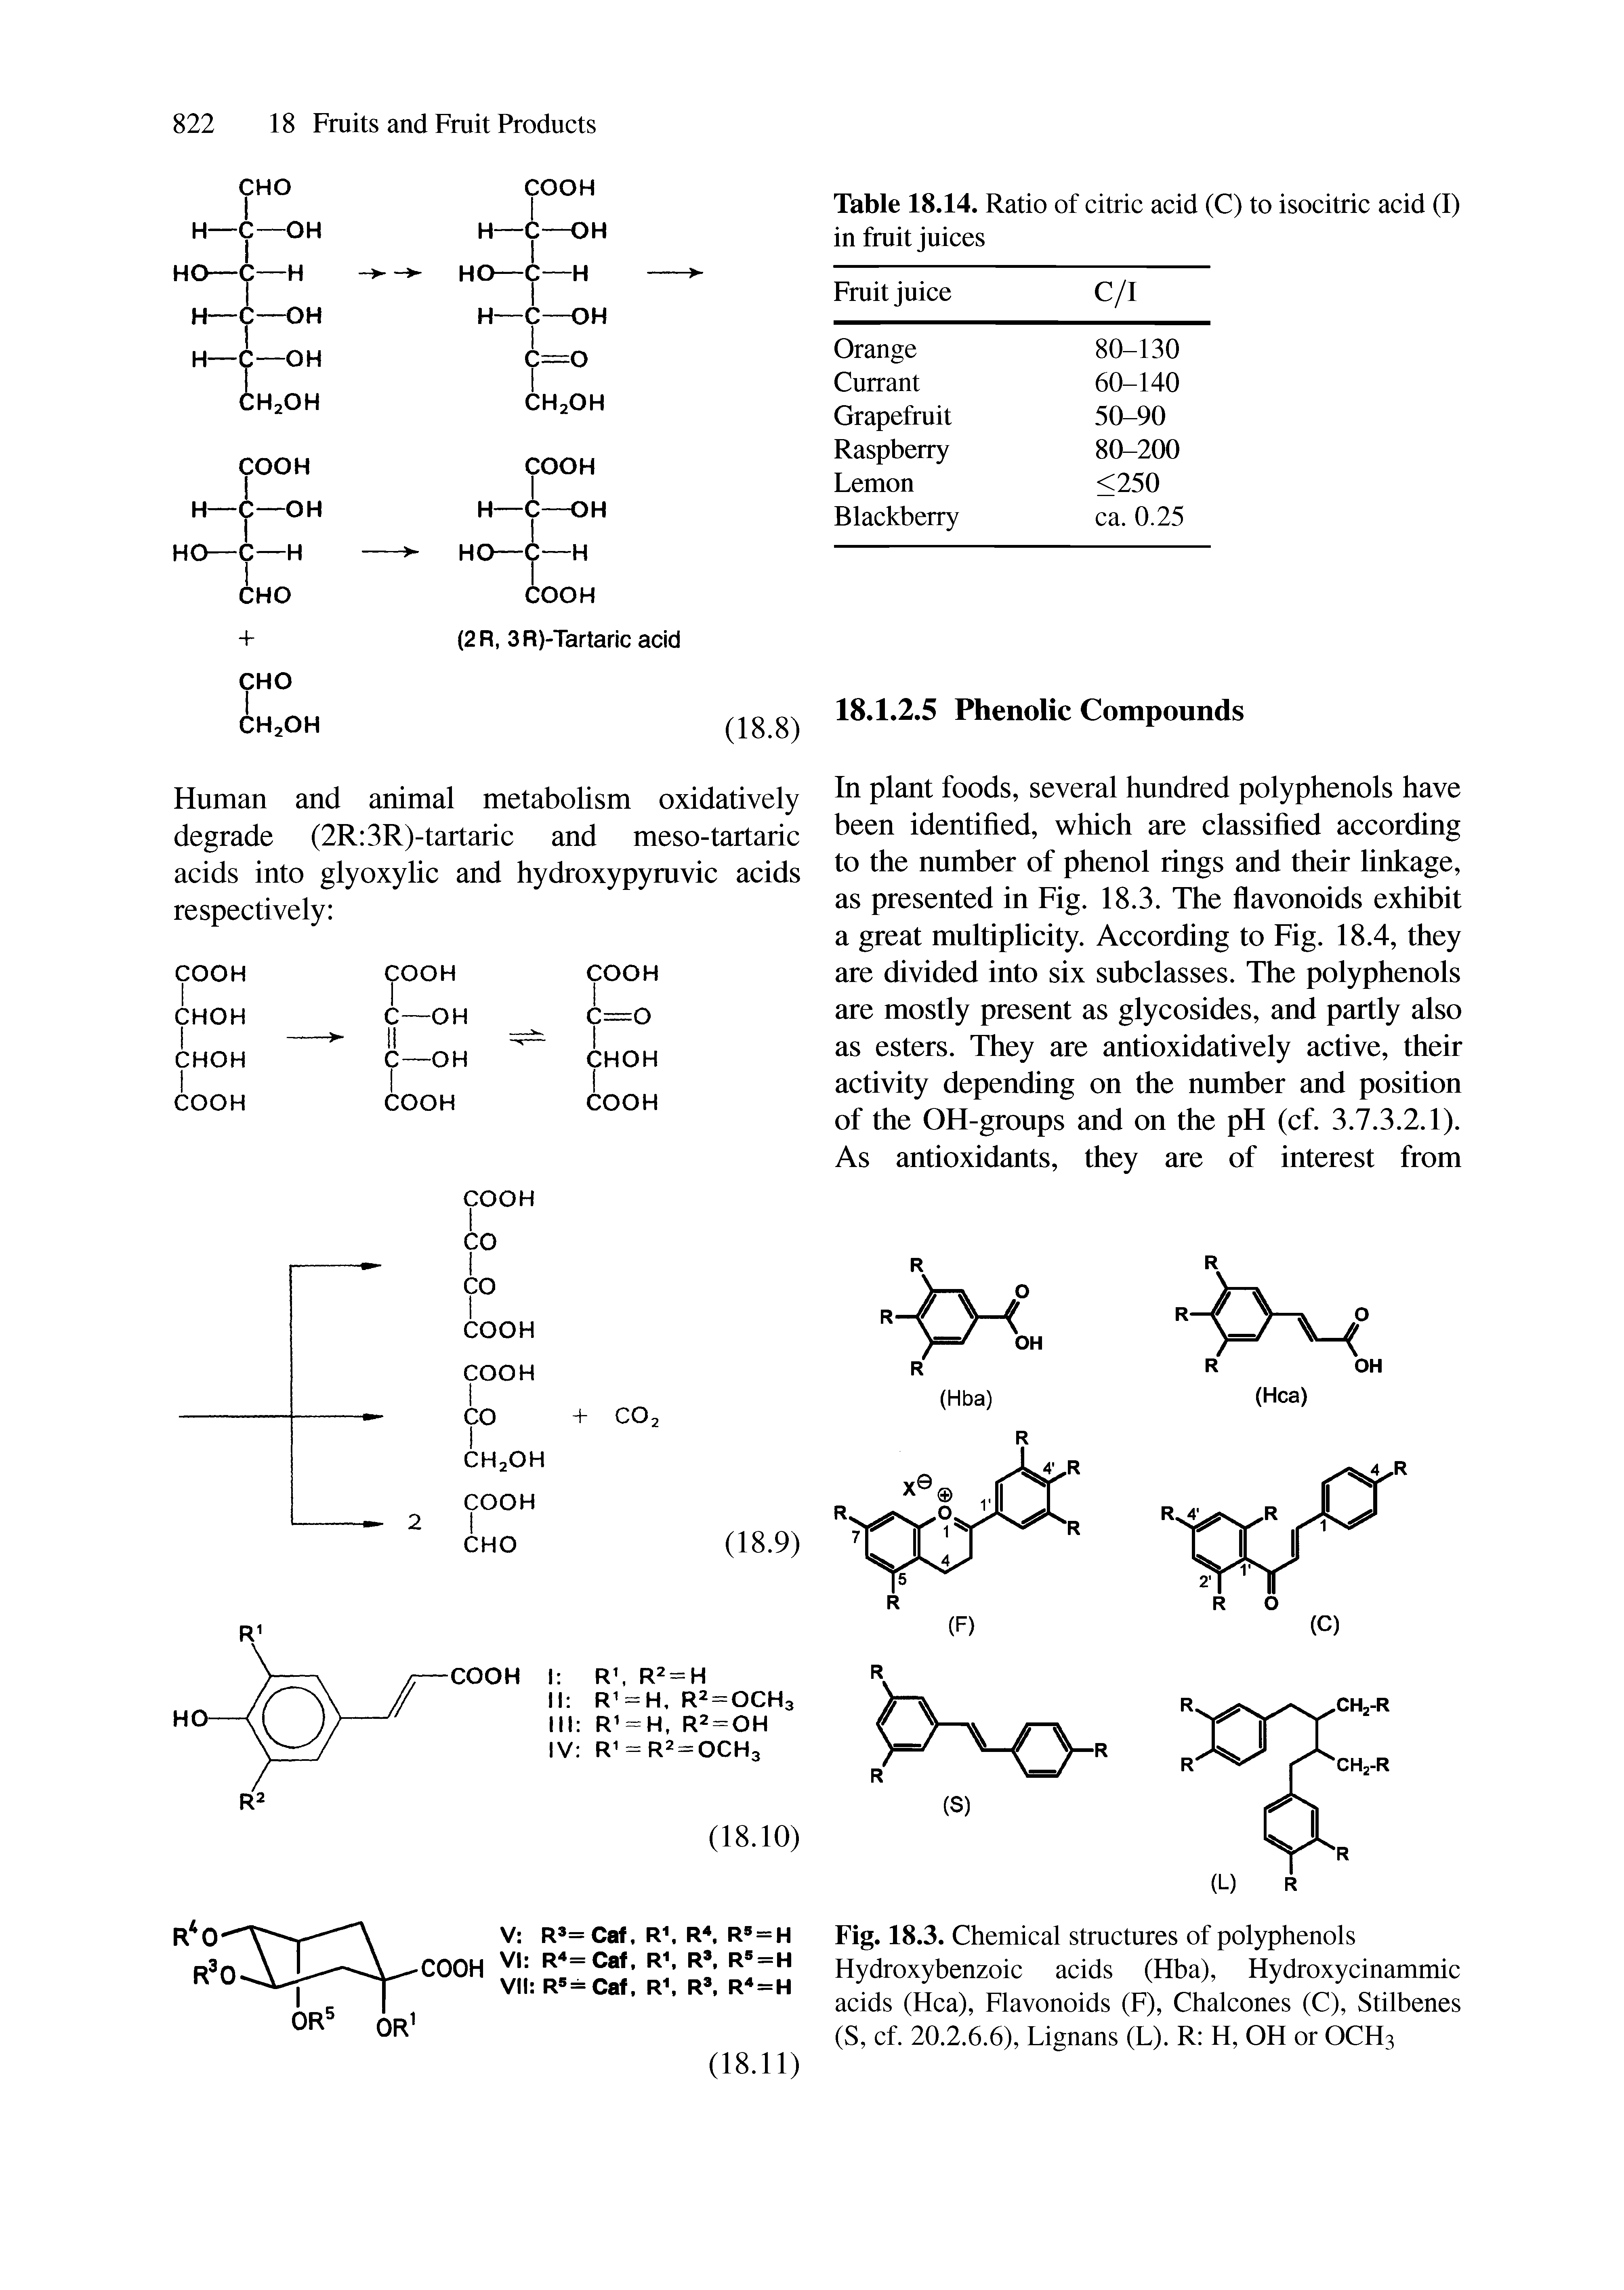 Fig. 18.3. Chemical structures of polyphenols Hydroxybenzoic acids (Hba), Hydroxy cinammic acids (Hca), Flavonoids (F), Chalcones (C), Stilbenes (S, cf. 20.2.6.6), Lignans (L). R H, OH or OCH3...